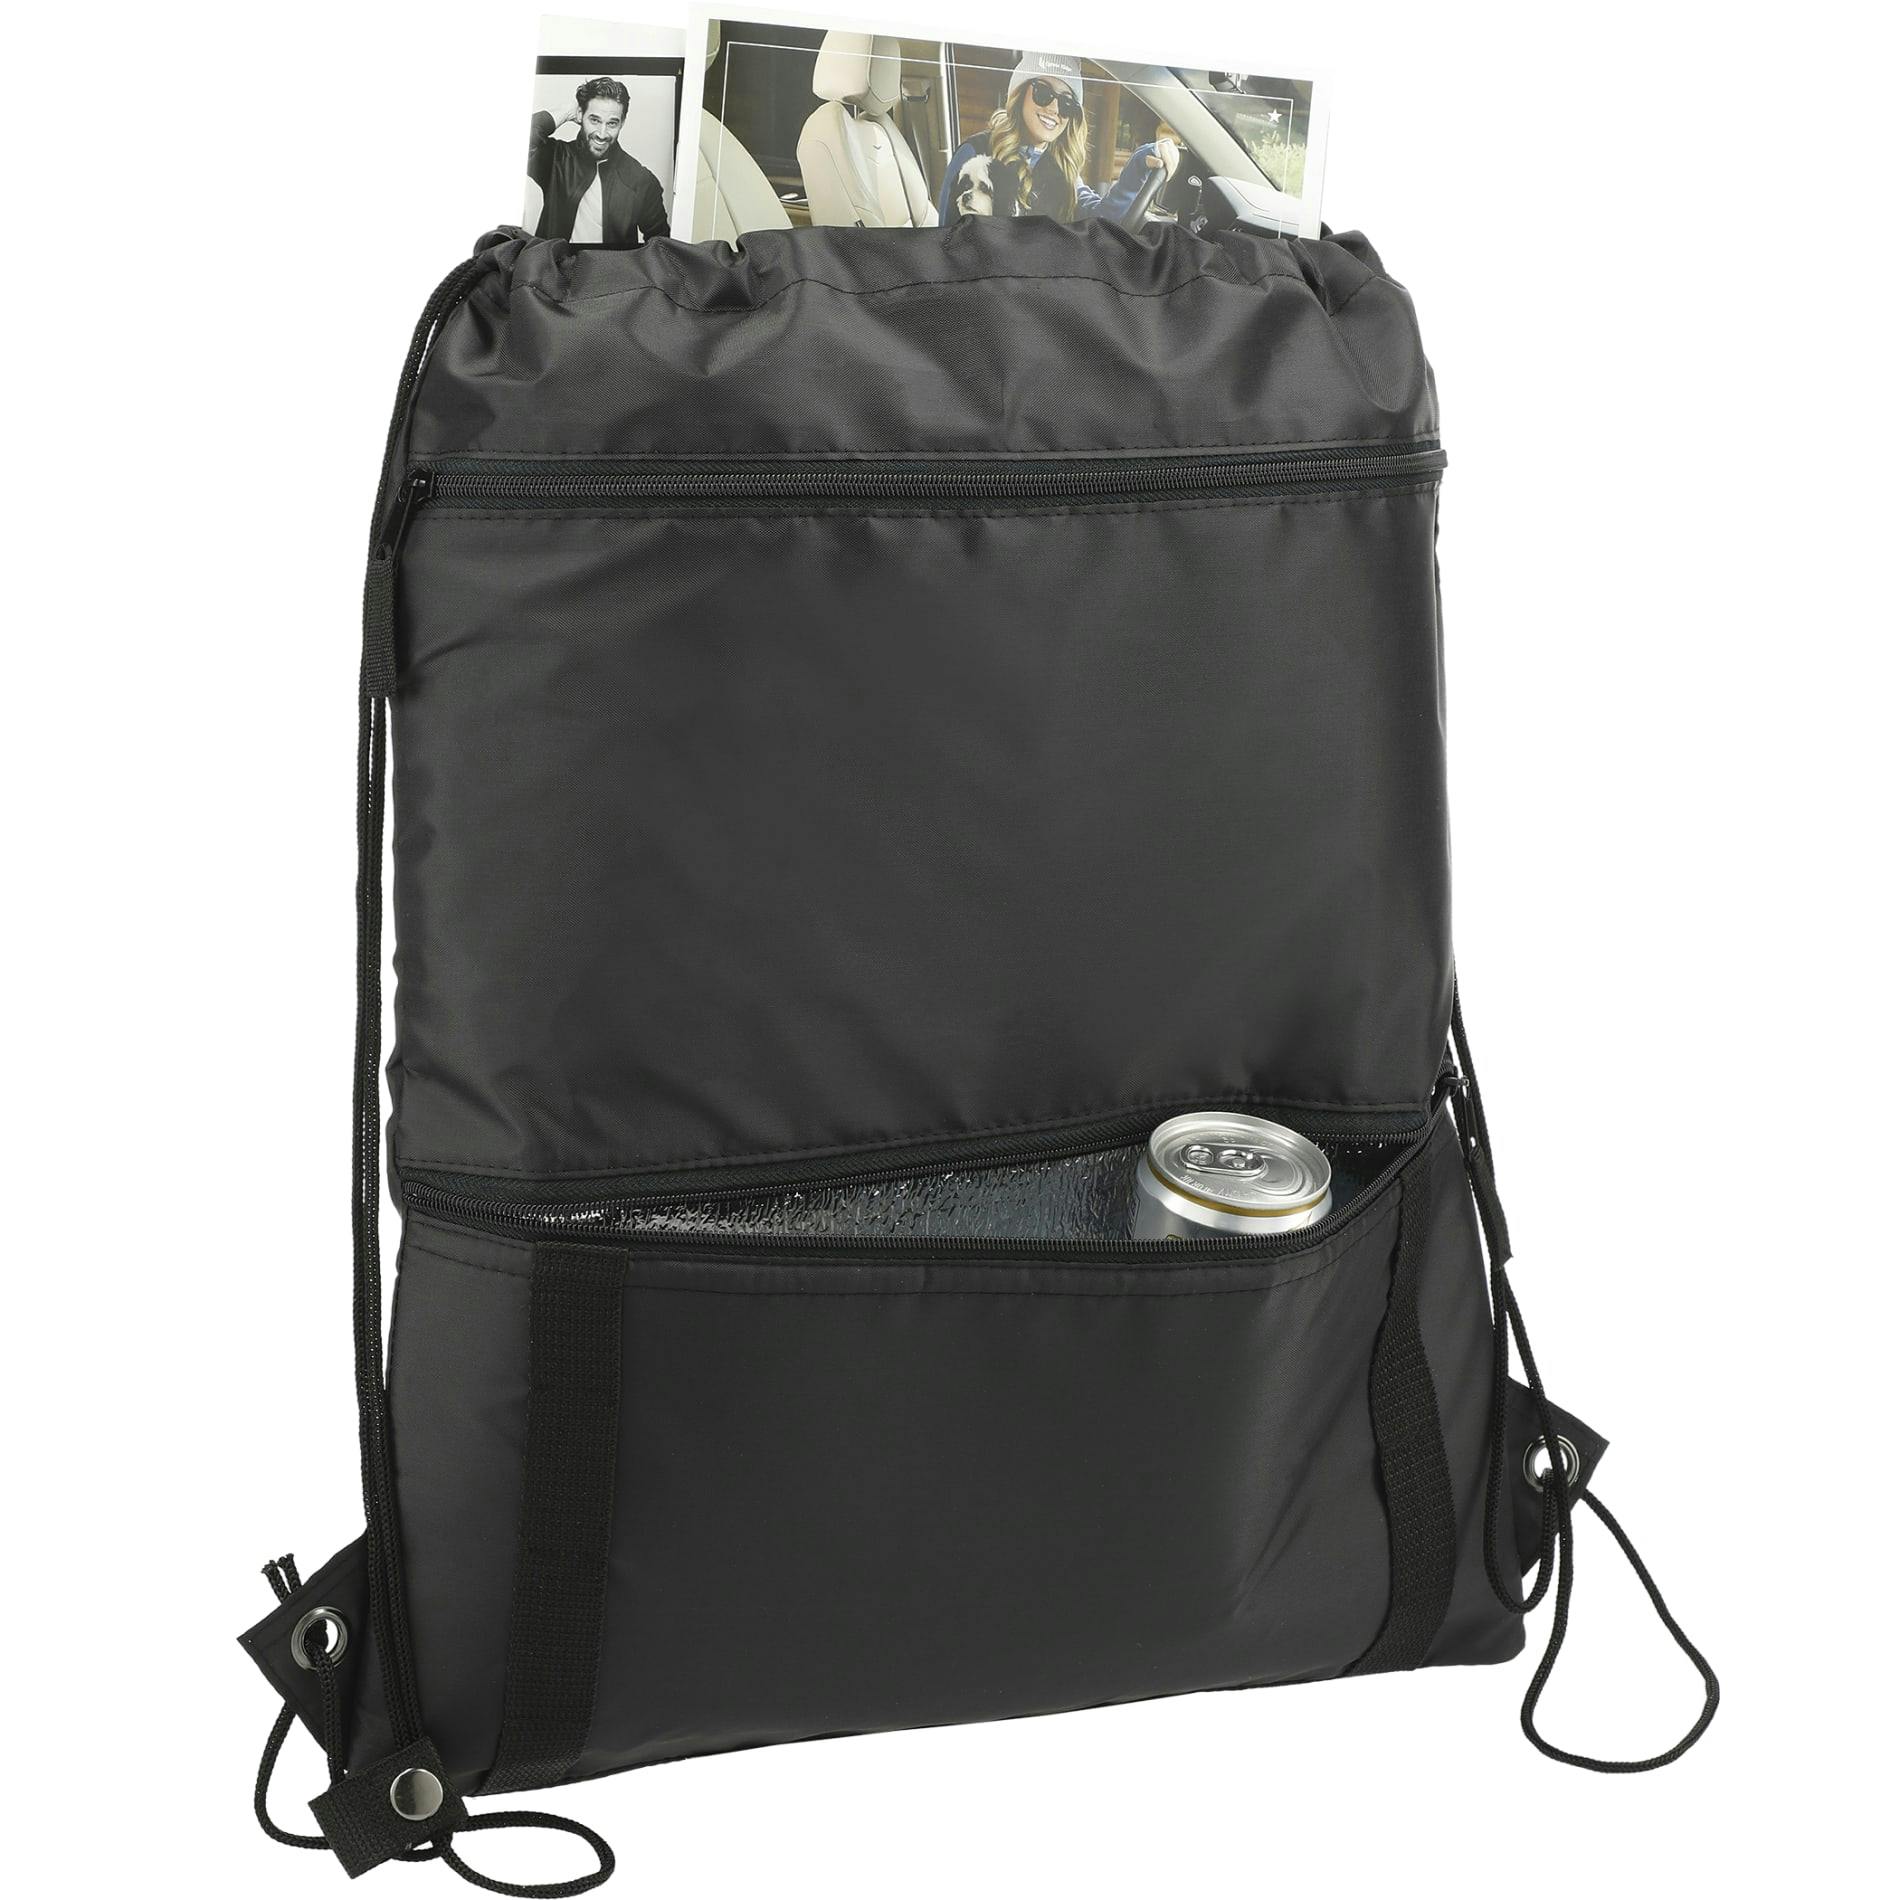 Adventure Insulated Drawstring - additional Image 2